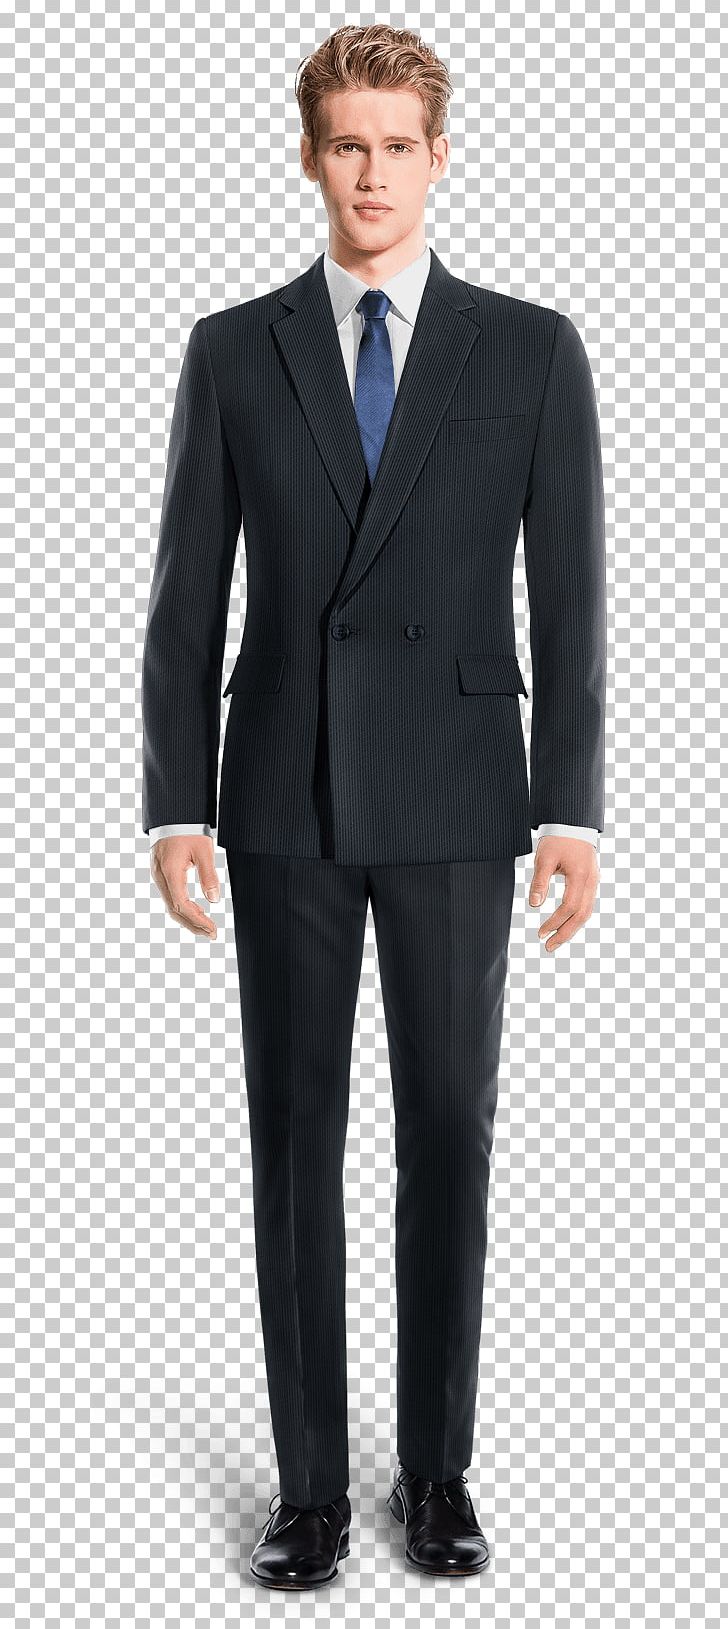 Suit Tweed Double-breasted Tuxedo Single-breasted PNG, Clipart, Blazer, Business, Businessperson, Chino Cloth, Clothing Free PNG Download